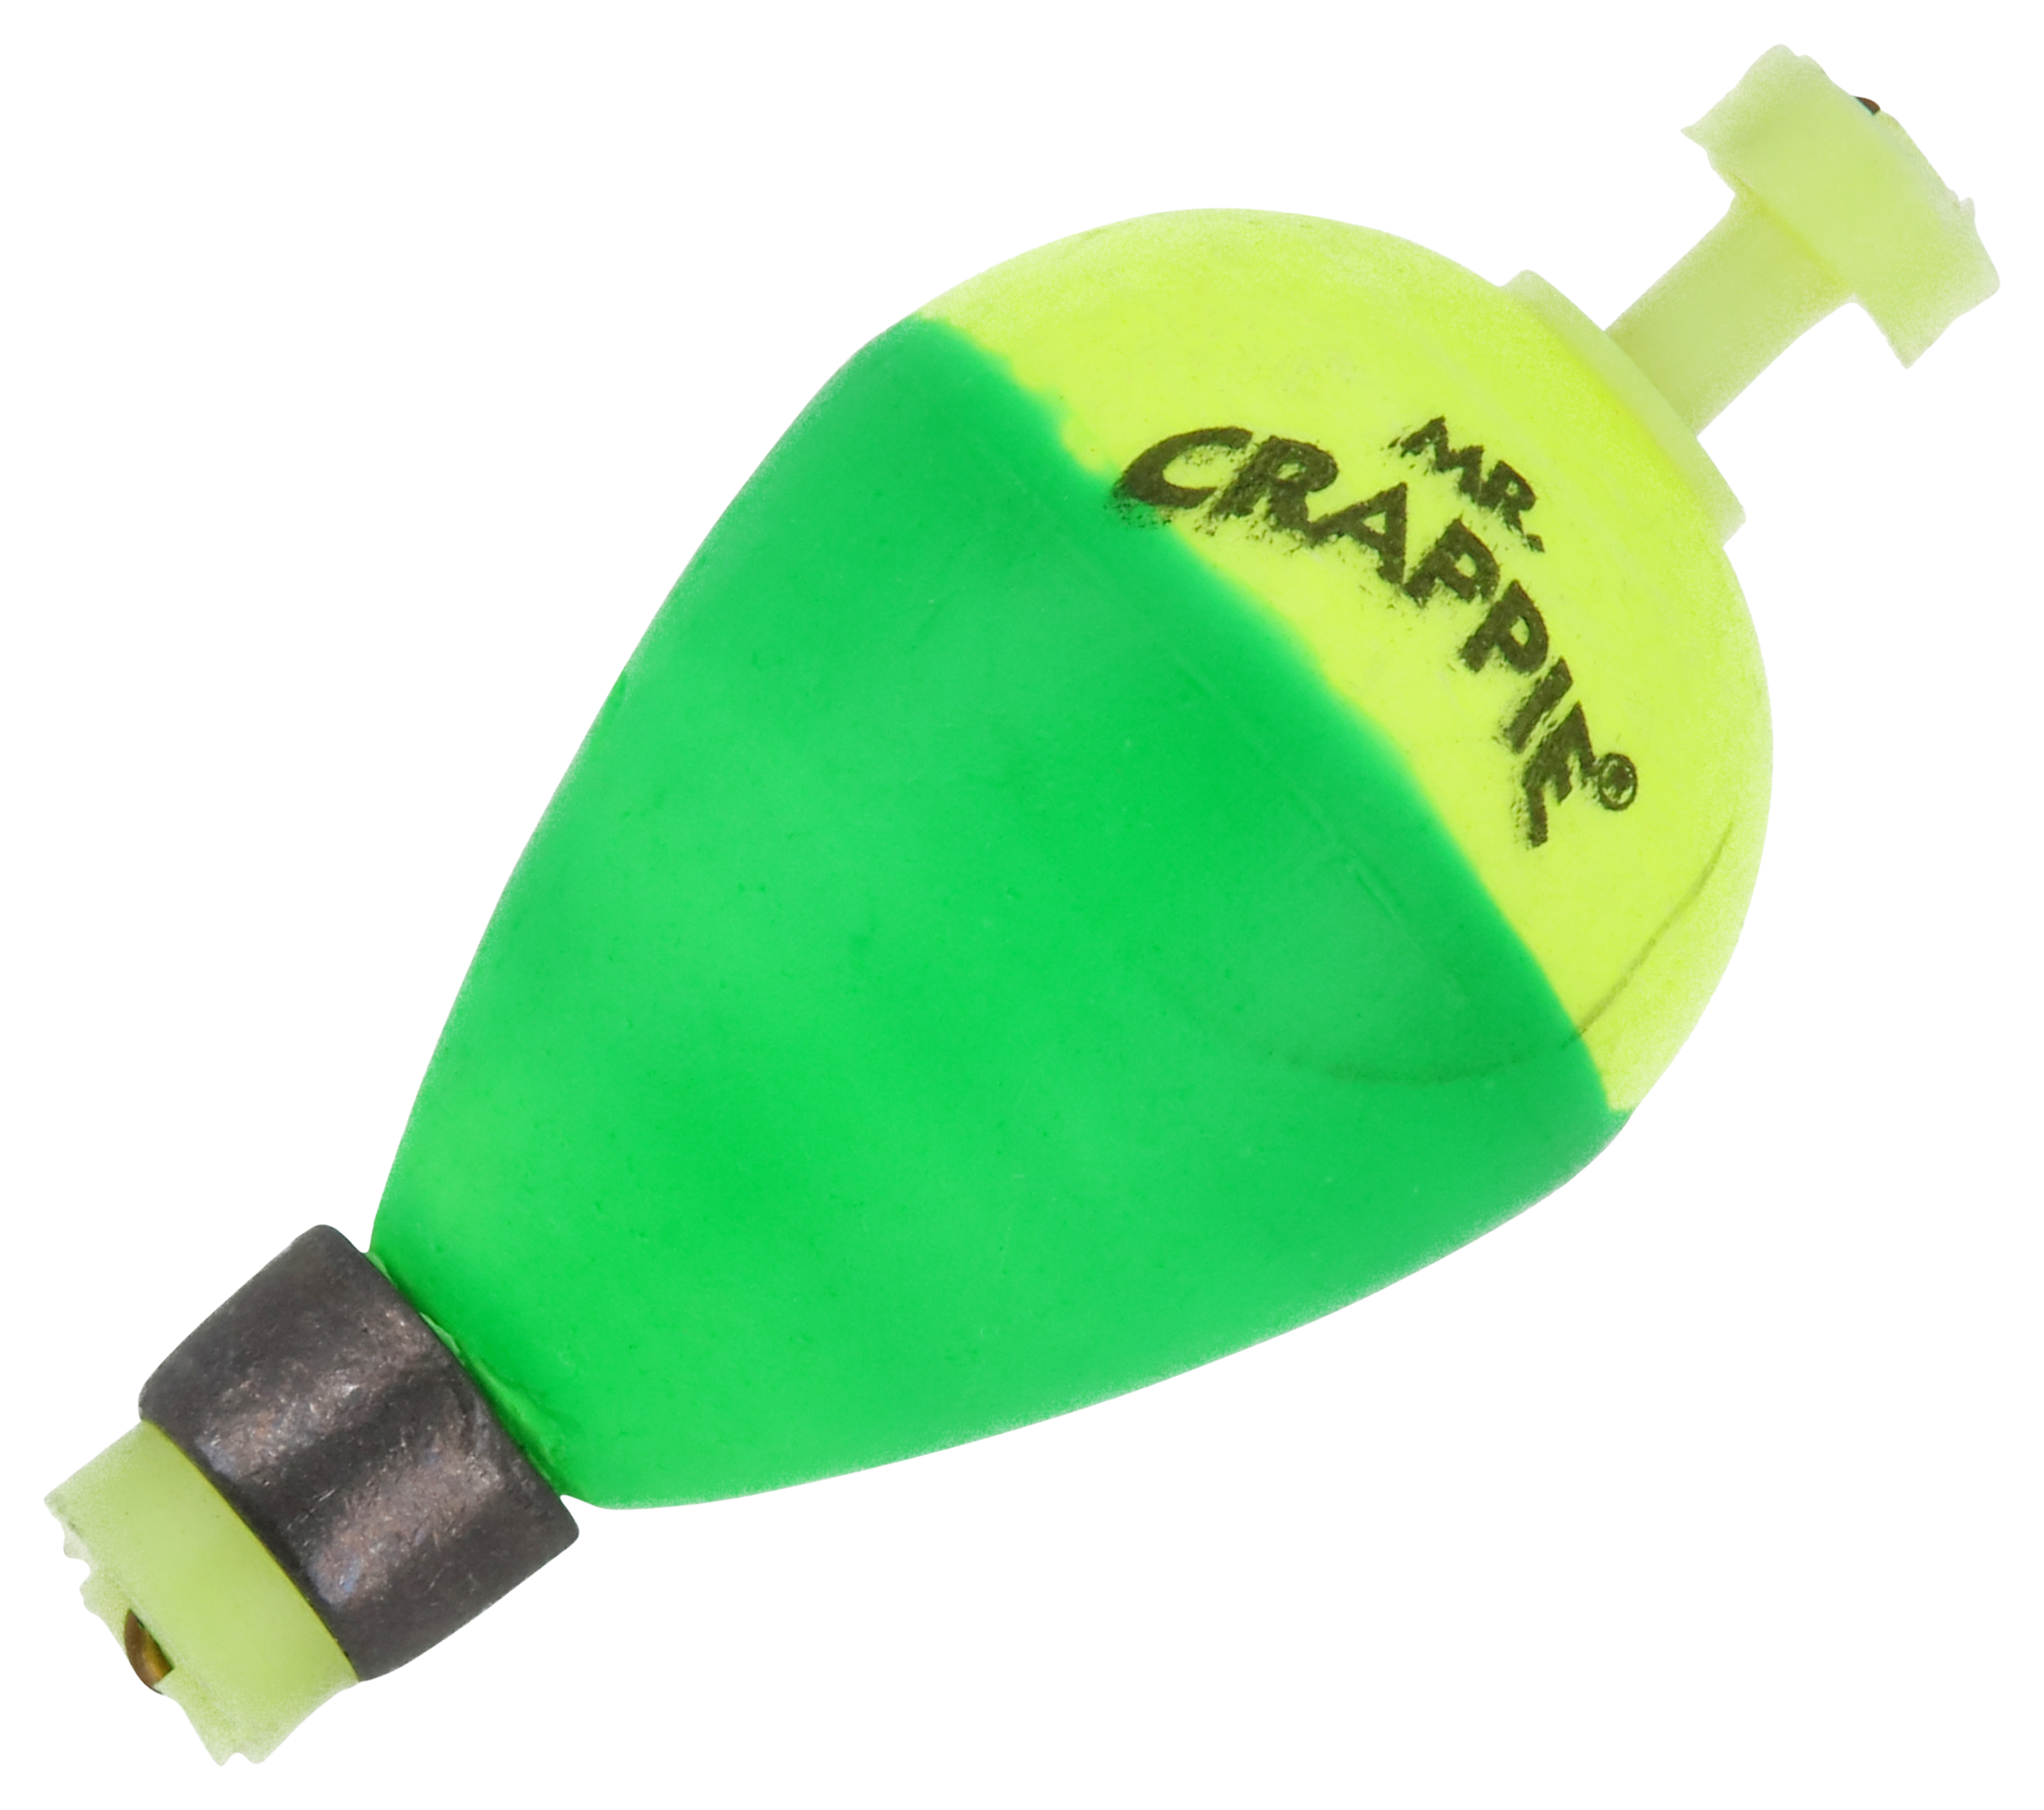 Mr. Crappie by Betts Snappers Weighted Floats